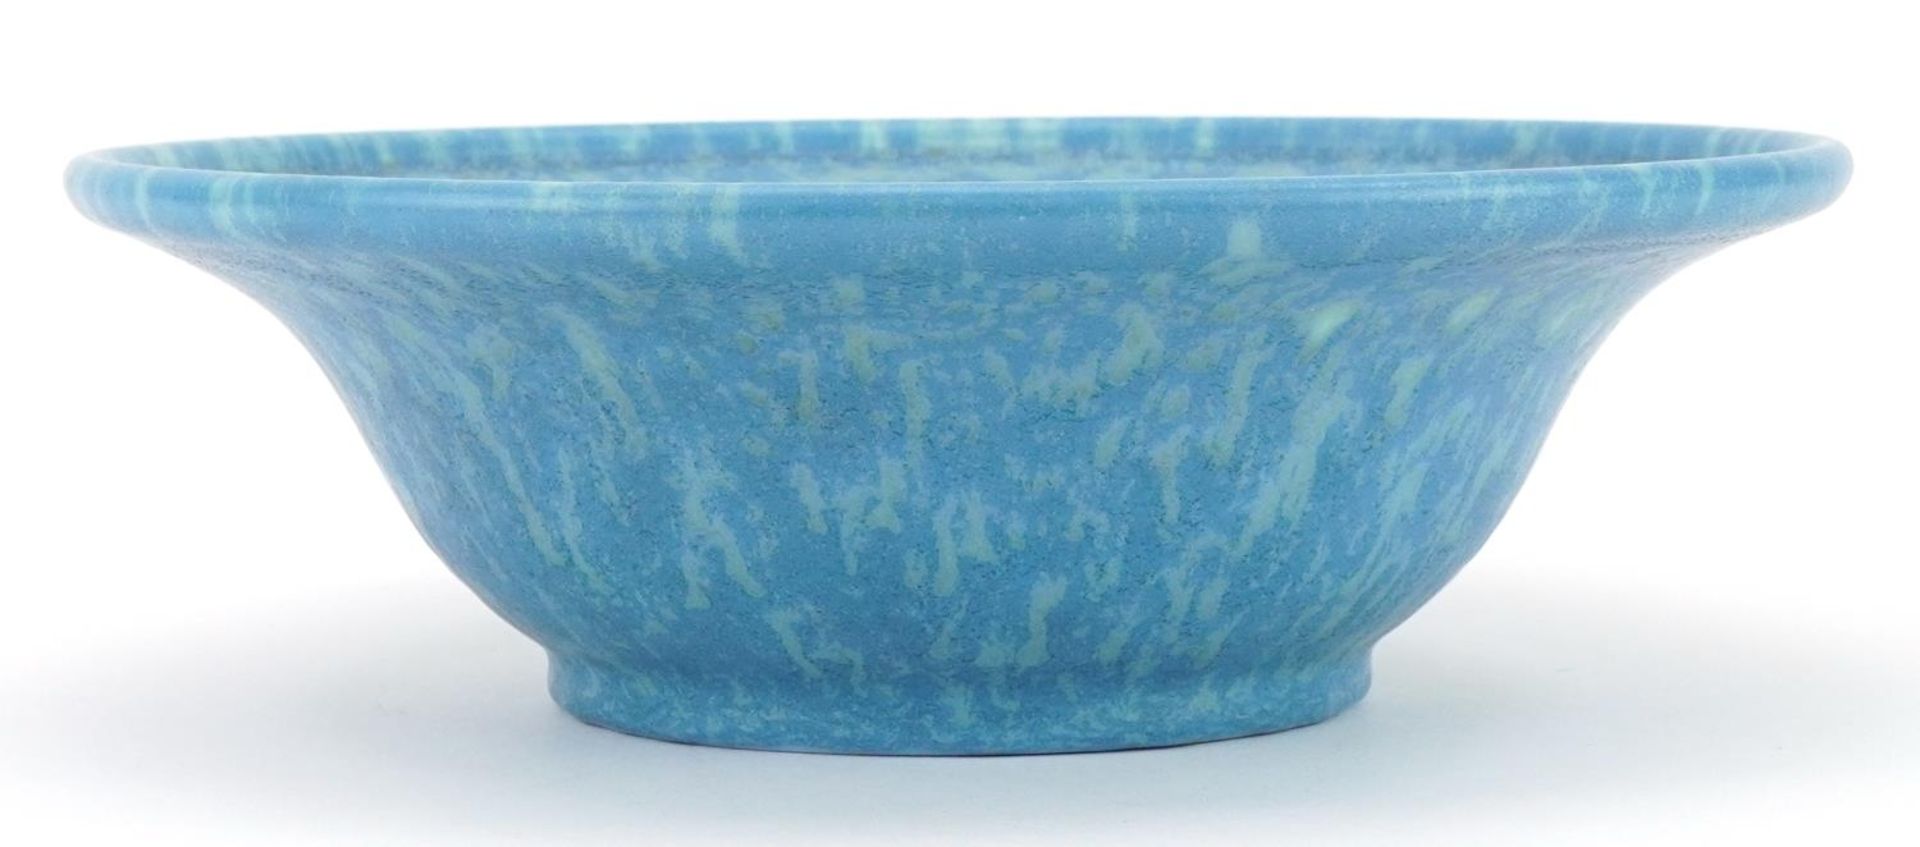 Pilkington's Royal Lancastrian bowl having a mottled blue glaze, initials E T R and numbered 170 - Image 2 of 4